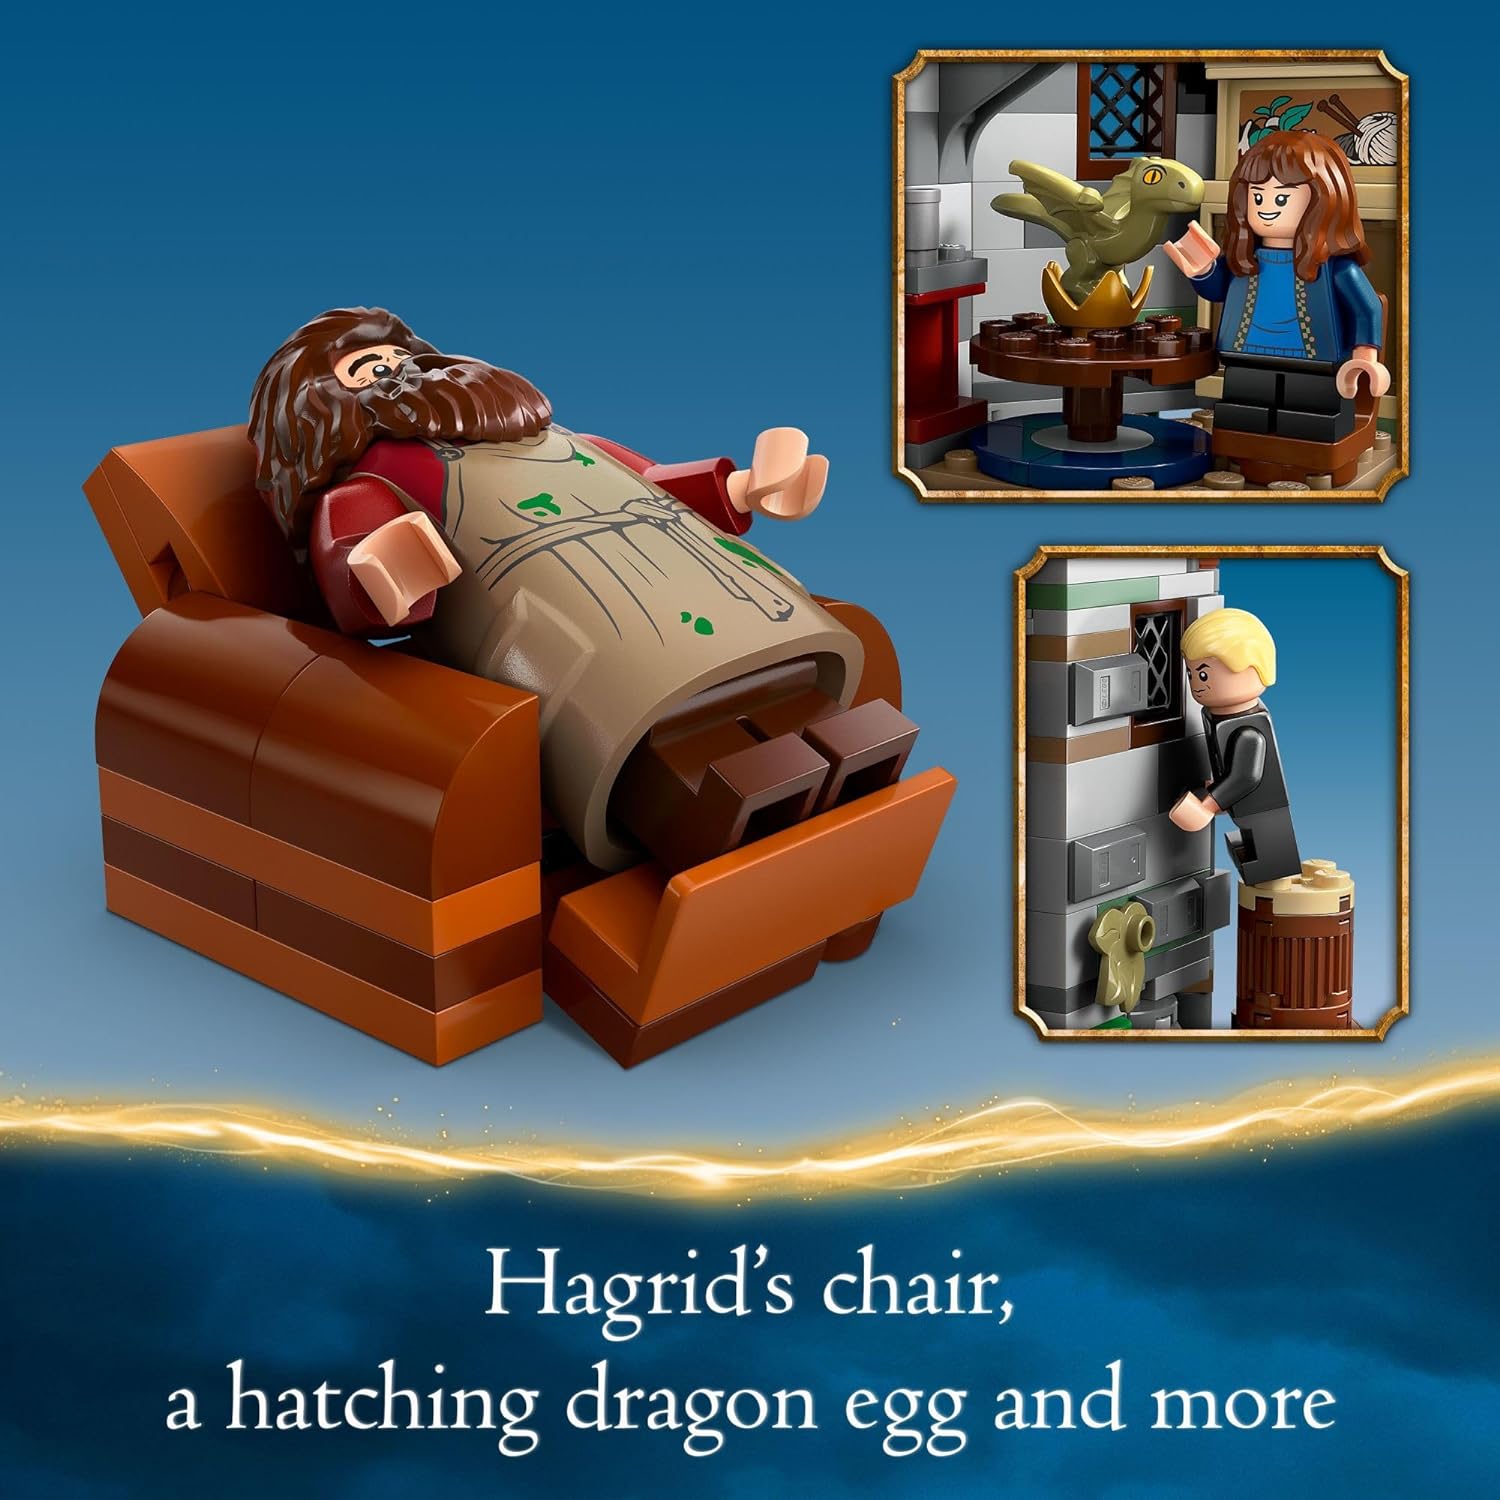 LEGO 76428 Harry Potter Hagrid’s Hut: An Unexpected Visit, Harry Potter Toy with 7 Characters and a Dragon for Magical Role Play, Buildable House Toy.